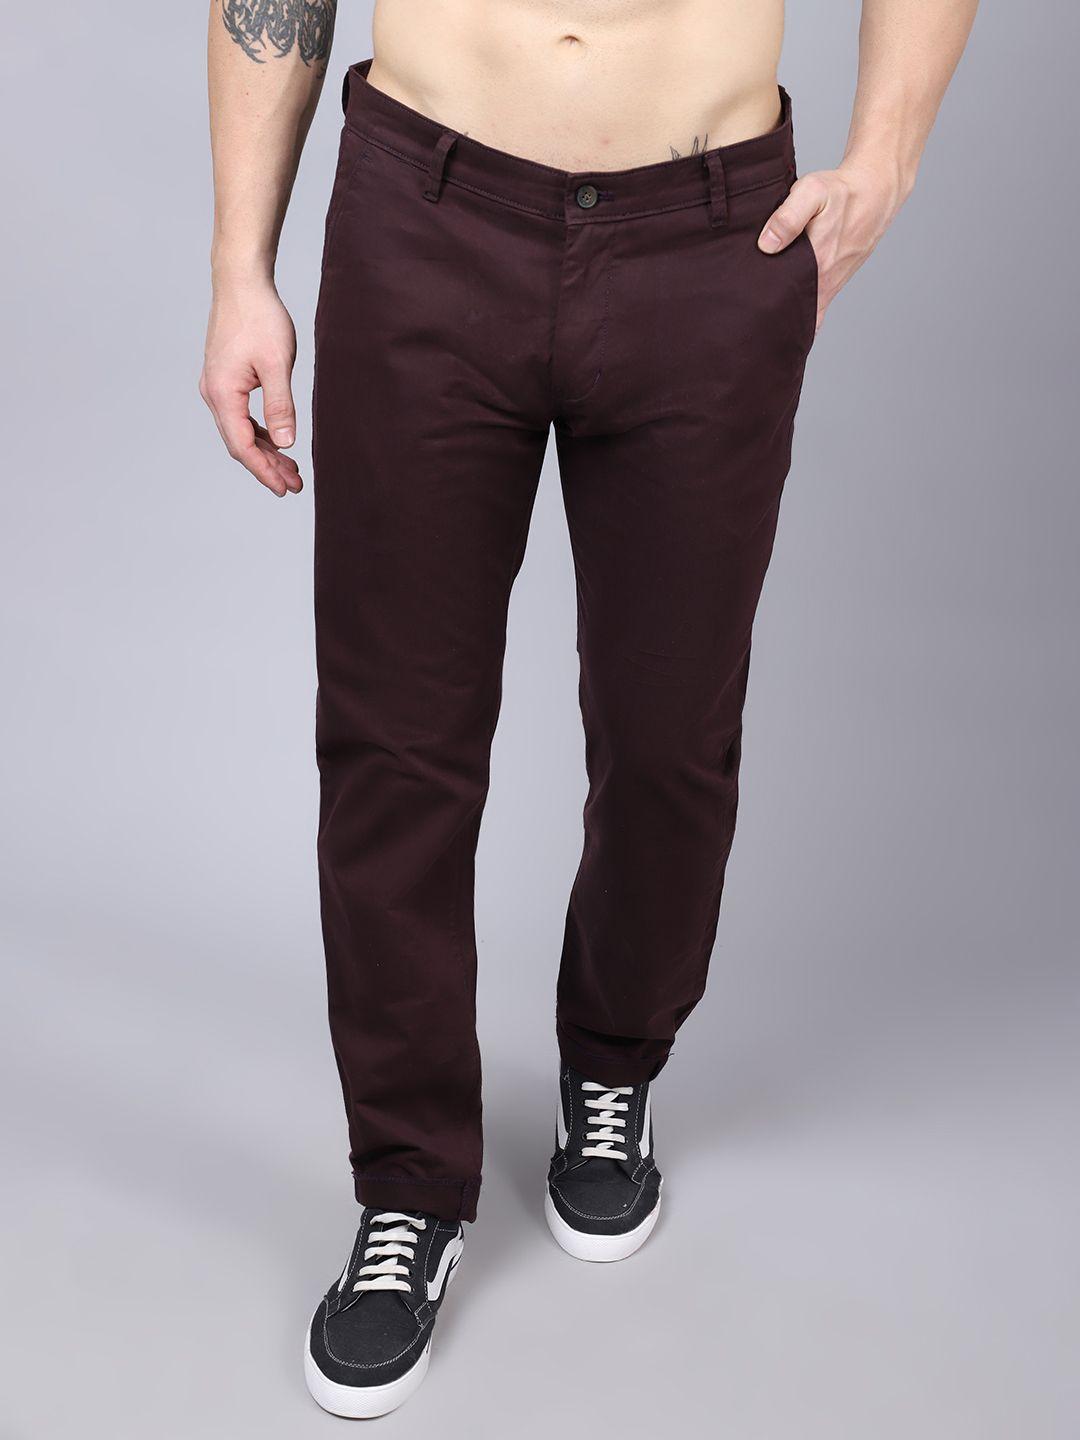 cantabil-men-maroon-wine--solid-chinos-trousers